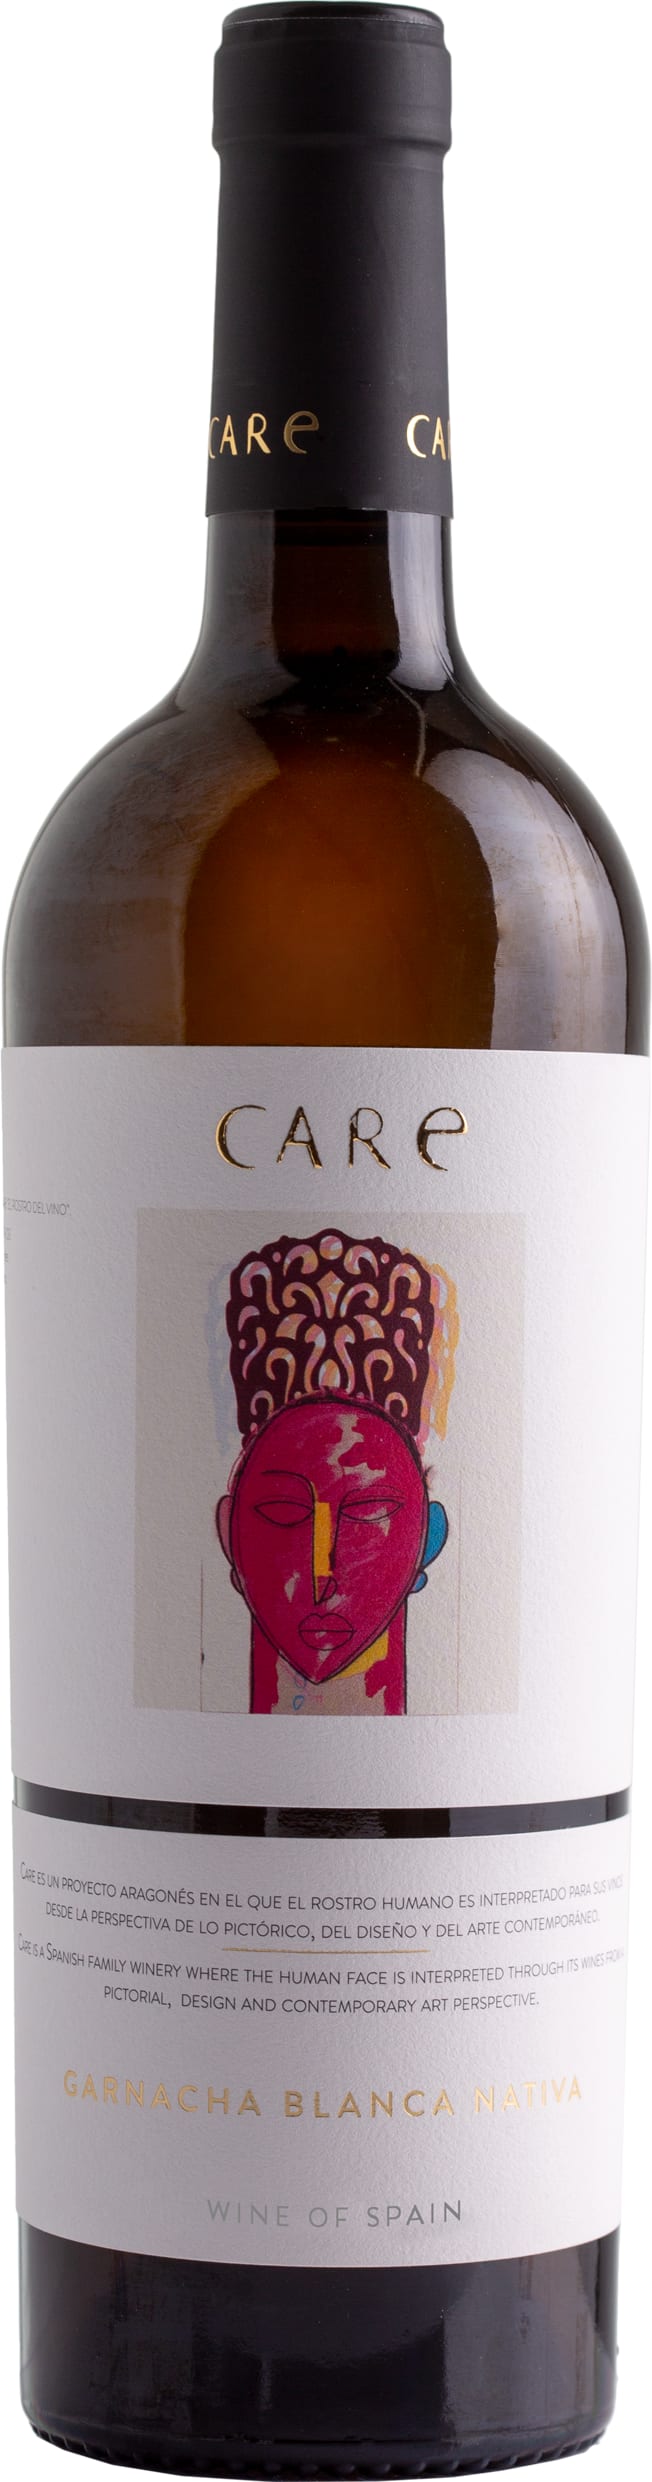 Care Garnacha Blanca Nativa 2022 75cl - Buy Care Wines from GREAT WINES DIRECT wine shop